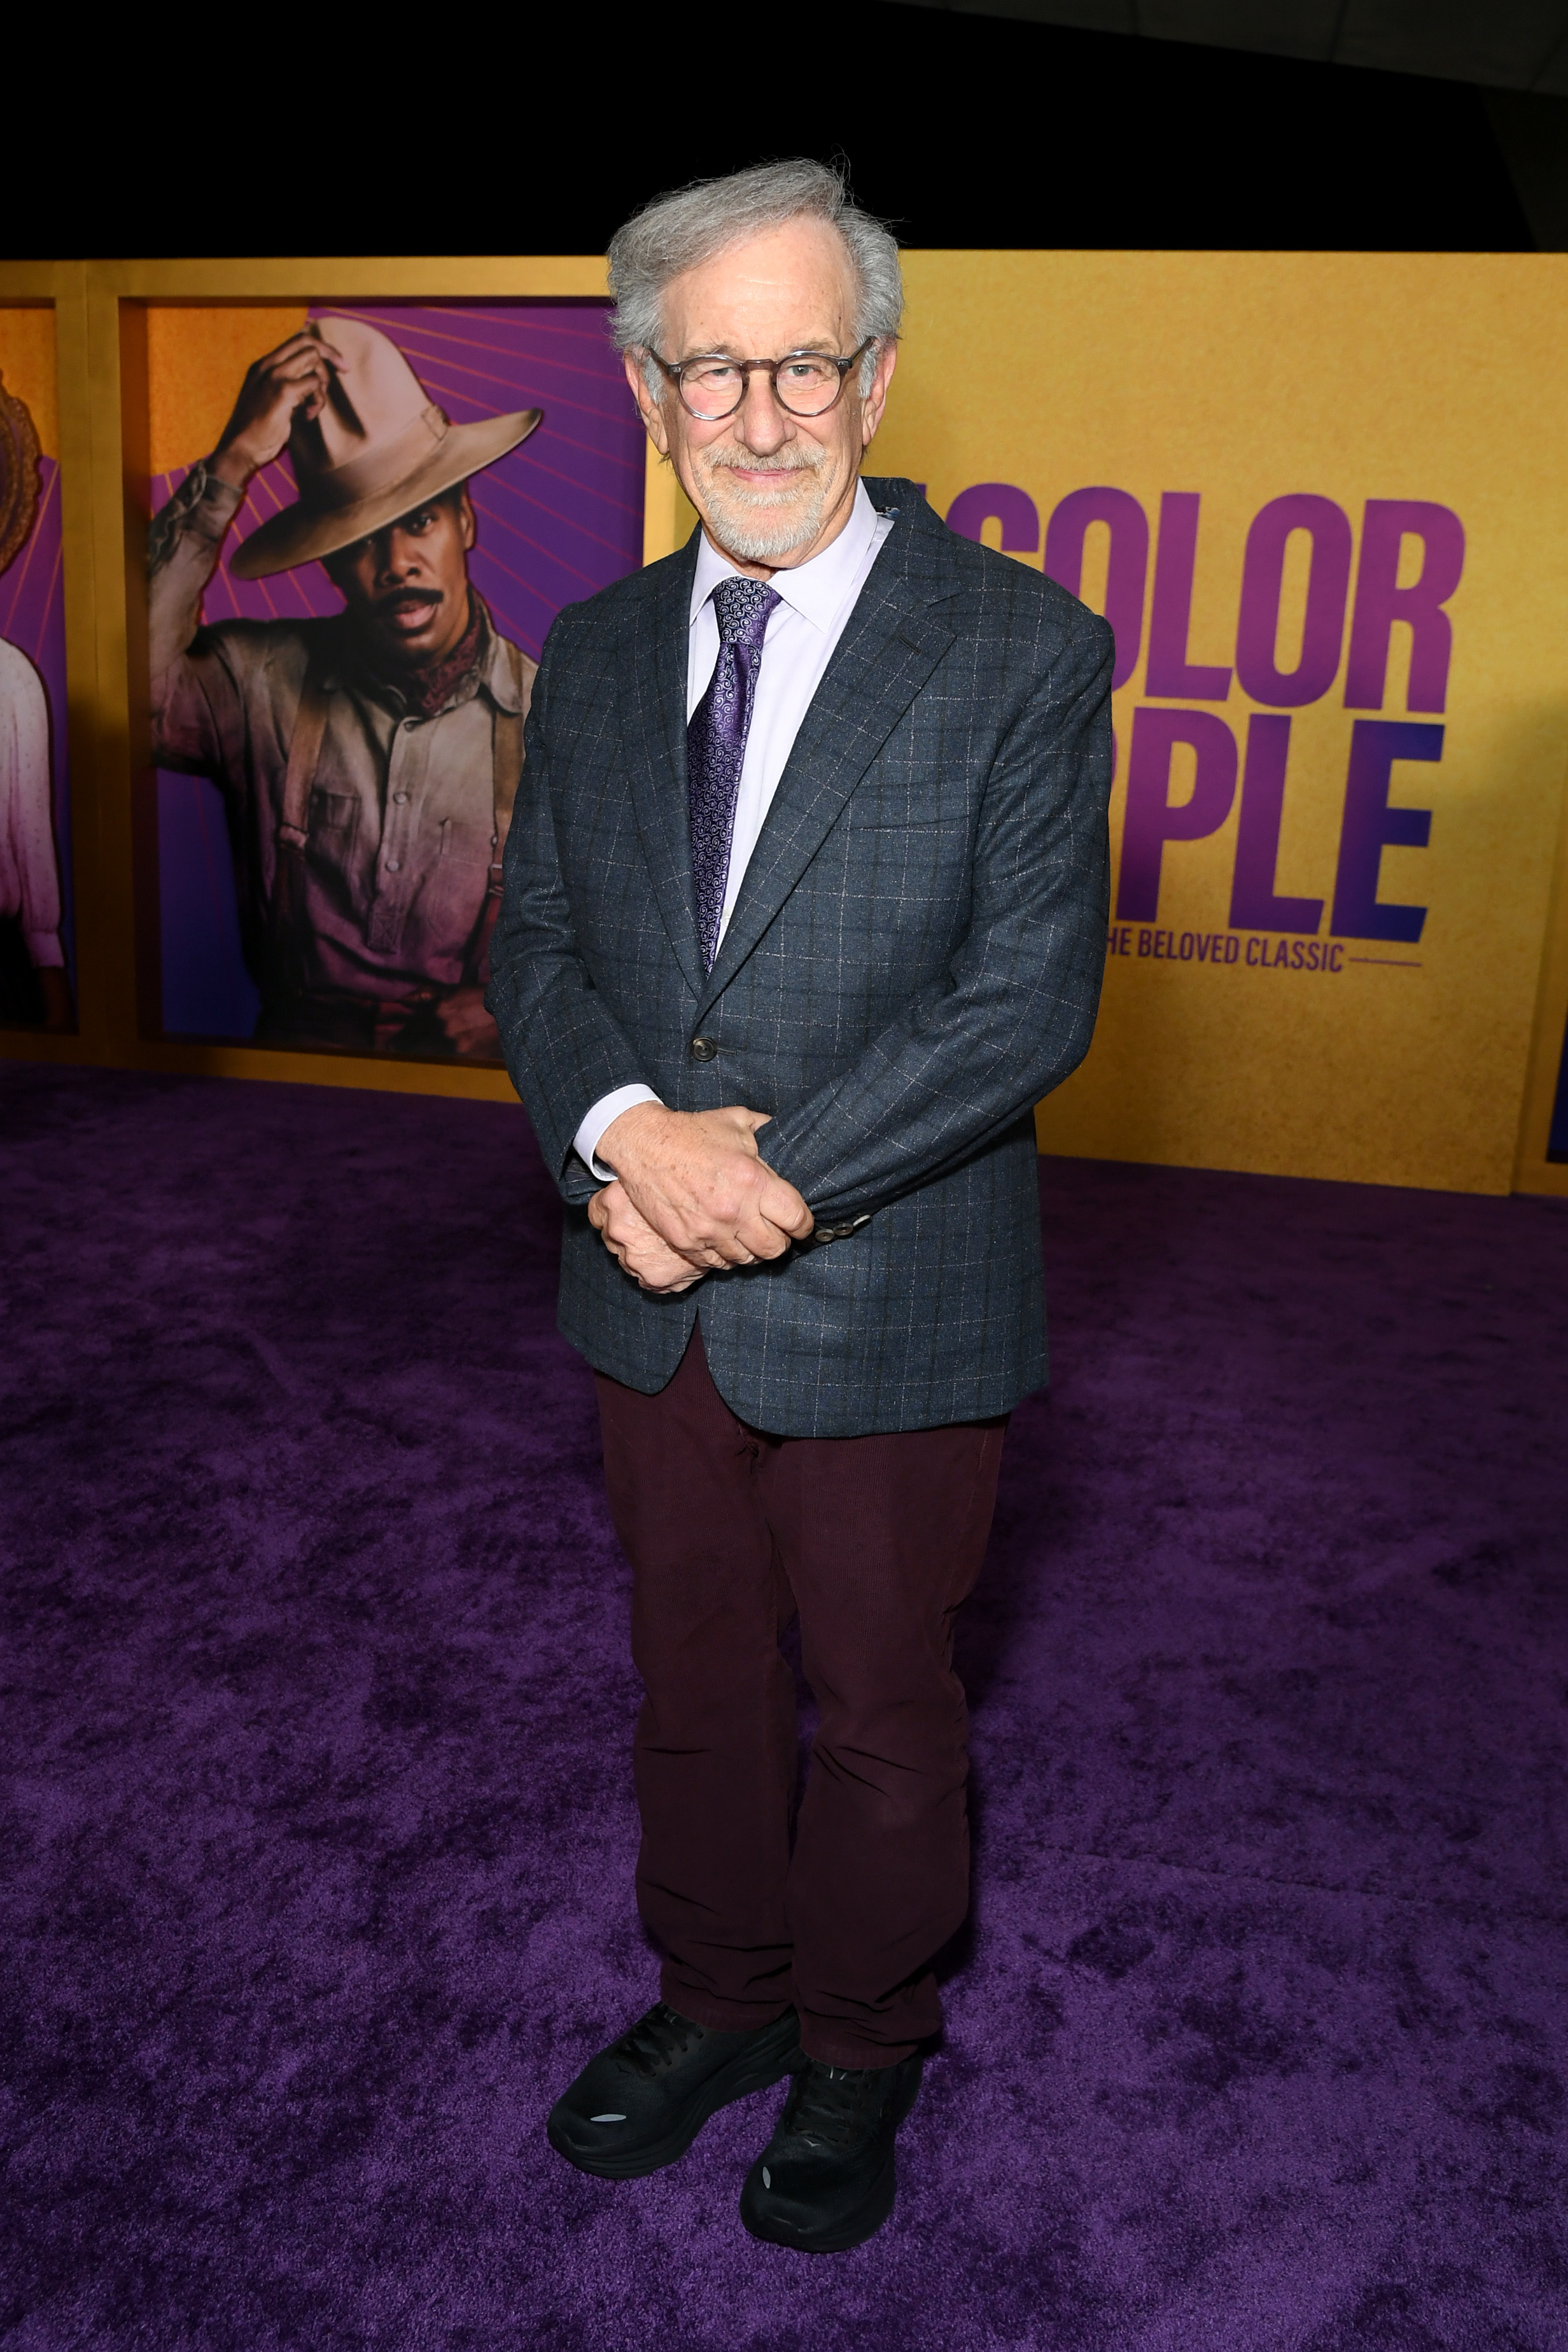 Steven in a plaid suit jacket with purple accents, purple tie, and purplish pants